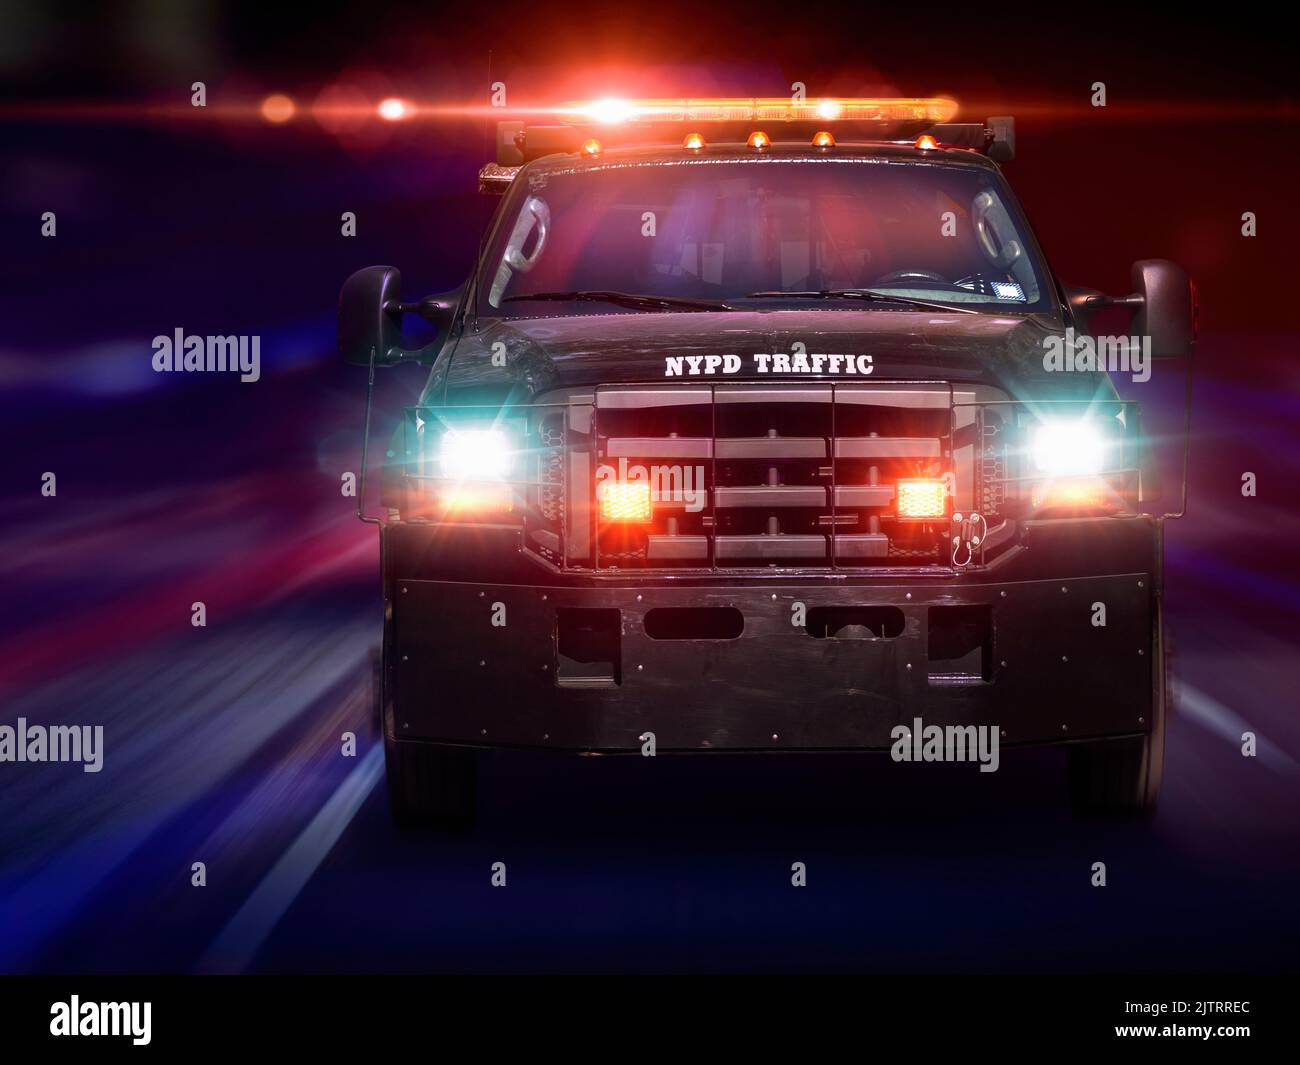 NYPD New York Police Department Traffic Vehicle with lights on driving fast to an incident at night. New York City NYC United States of America USA Stock Photo